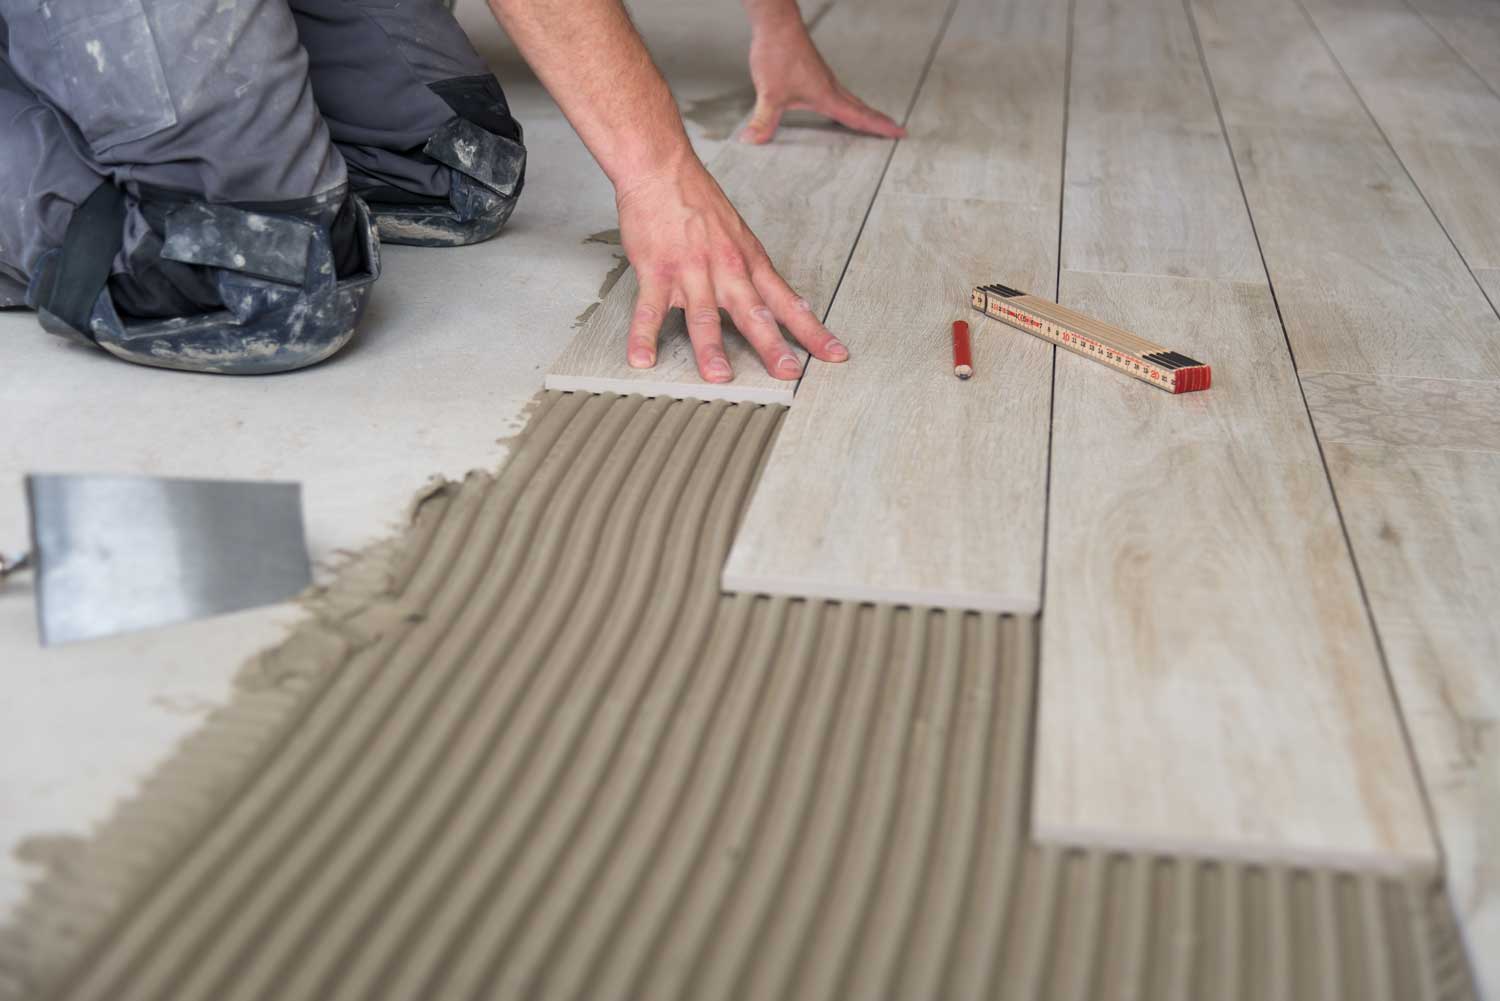 At Footprints Floors, our tile replacement experts get the job done.